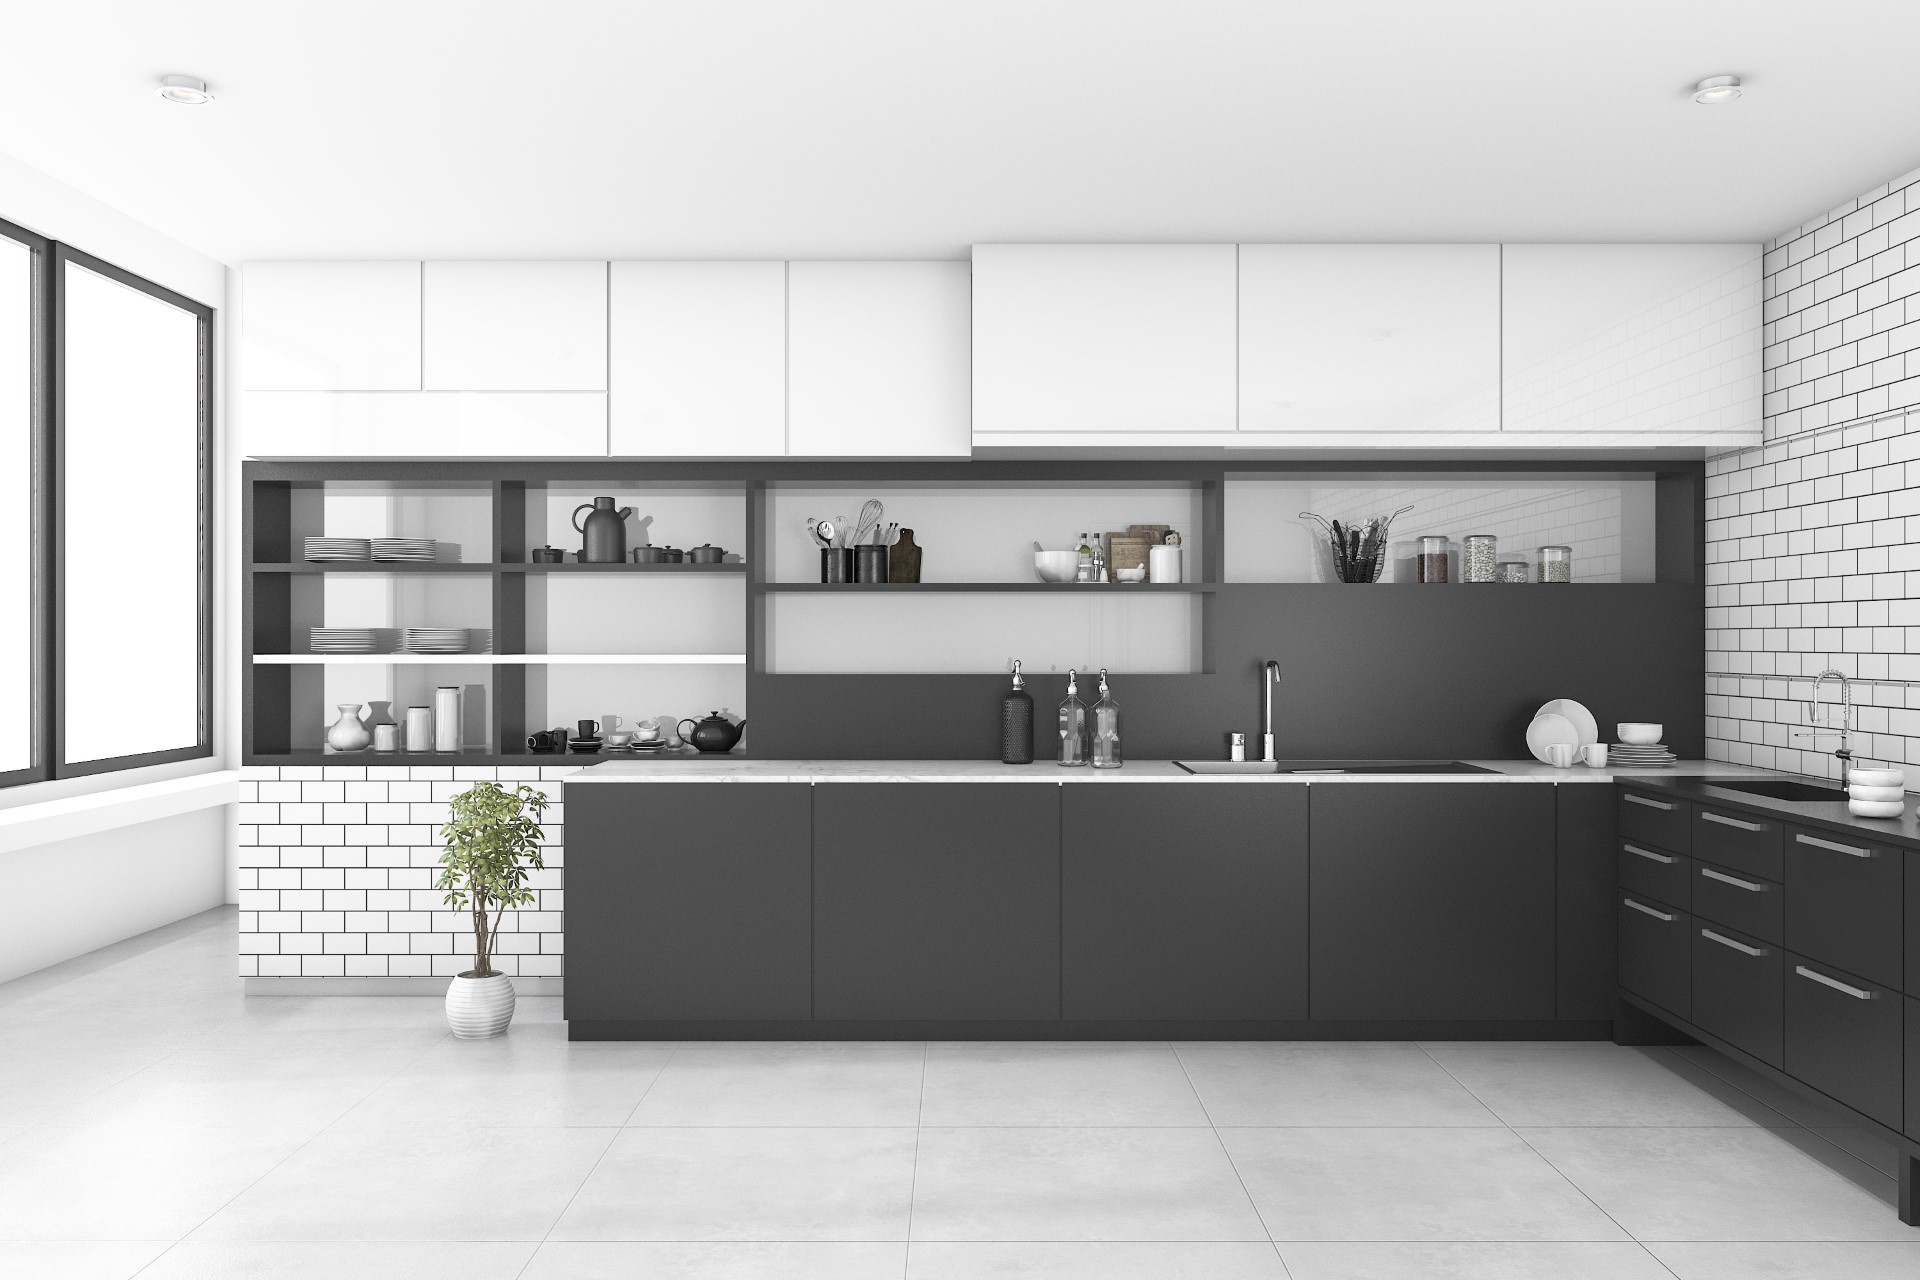 For someone who wants that bold entryway to the cooking environment, this is the aggressive style you need. All the dishes readily on display, no more shuffling through cabinets to find what you need. This minimalist design carries the bear functionalities of the common kitchen.